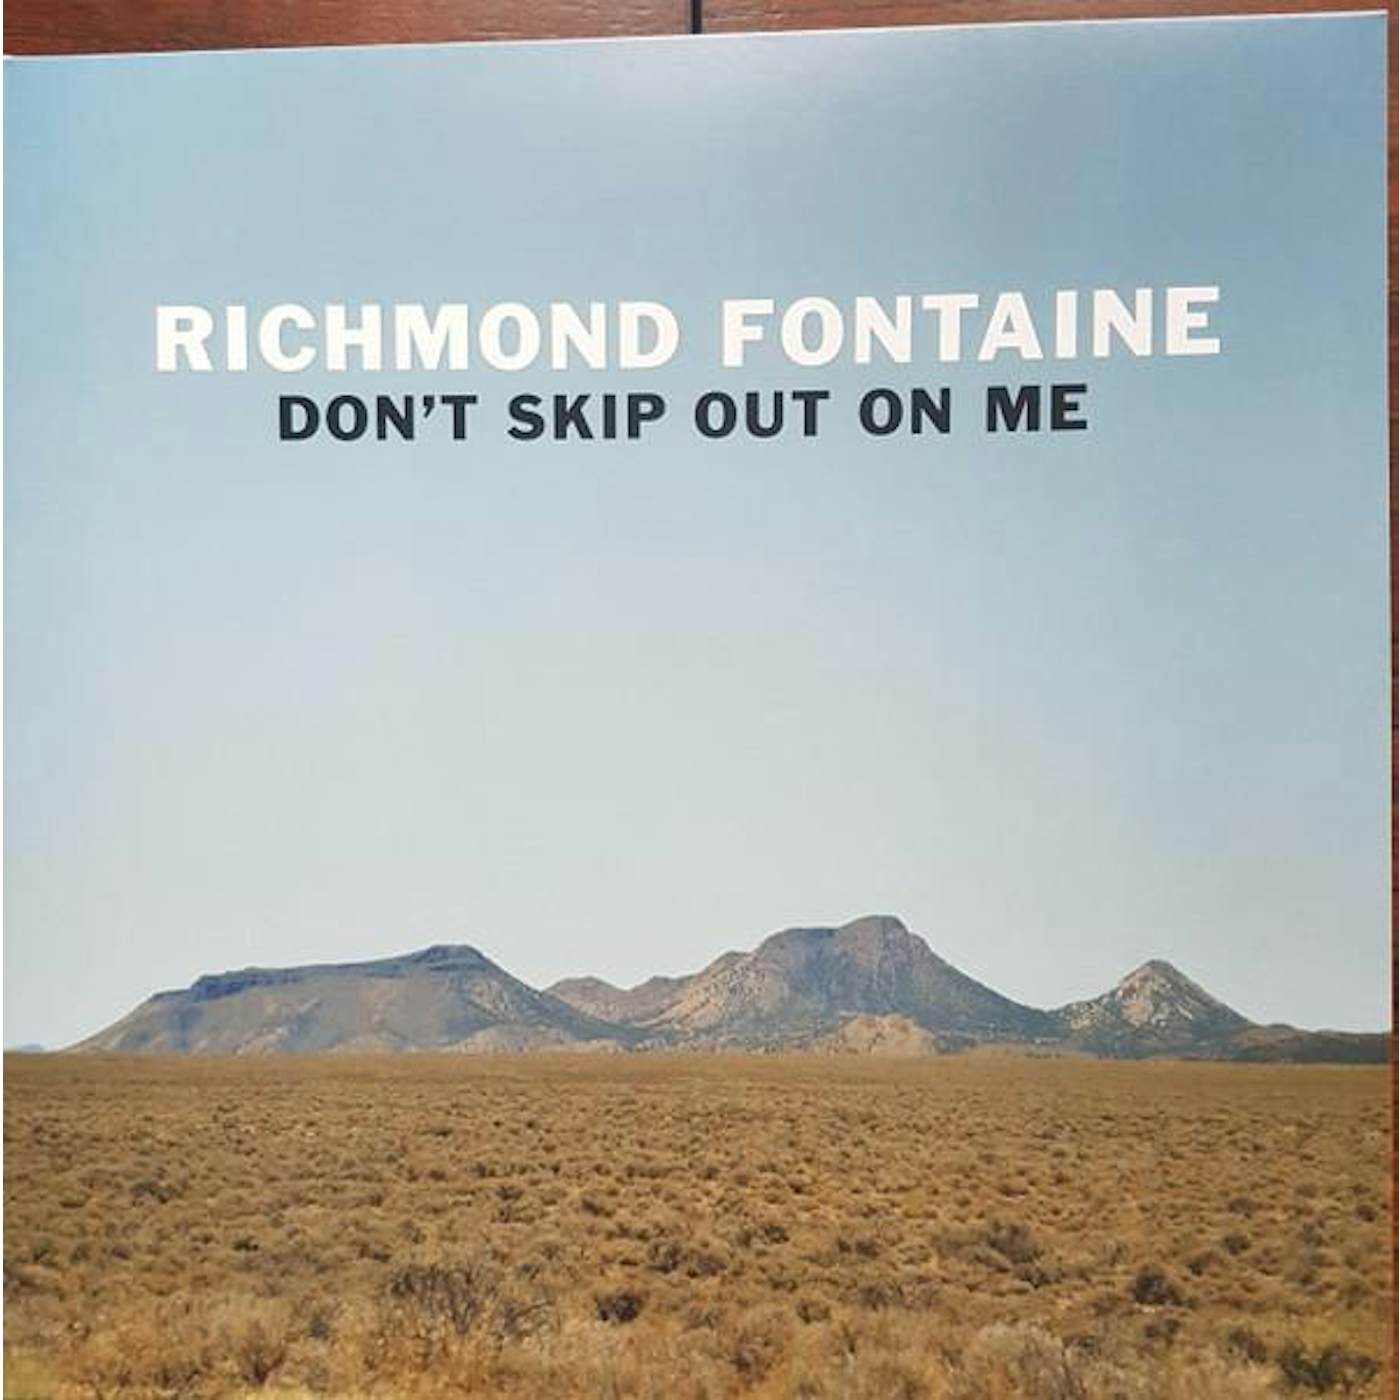 Richmond Fontaine DON'T SKIP OUT ON ME (180G) Vinyl Record